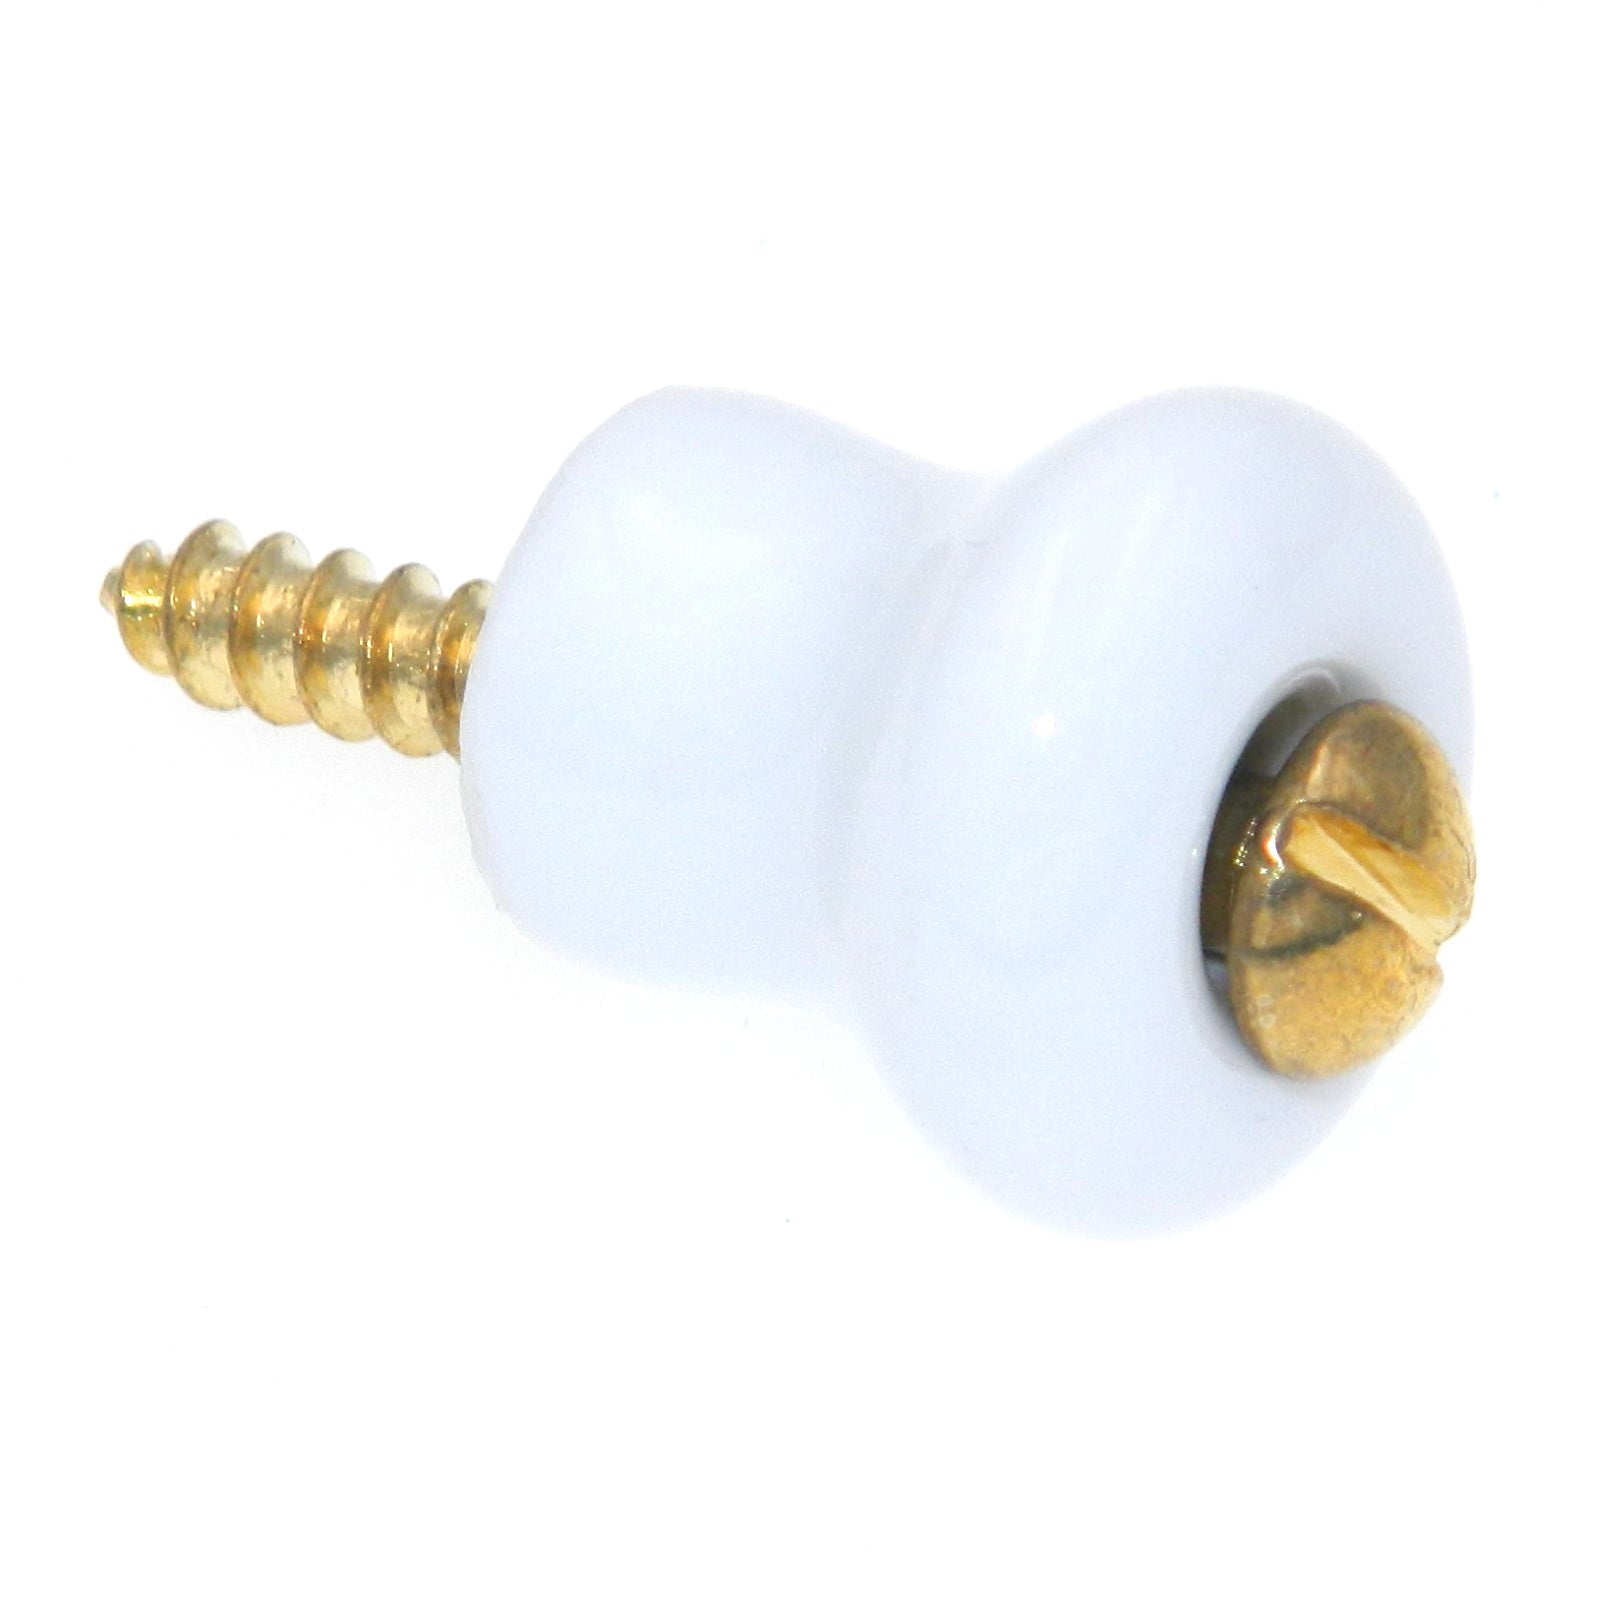 Hickory Hardware English Cosy 11/16" White with Polished Brass Screw Stem Cabinet Knob P2-W